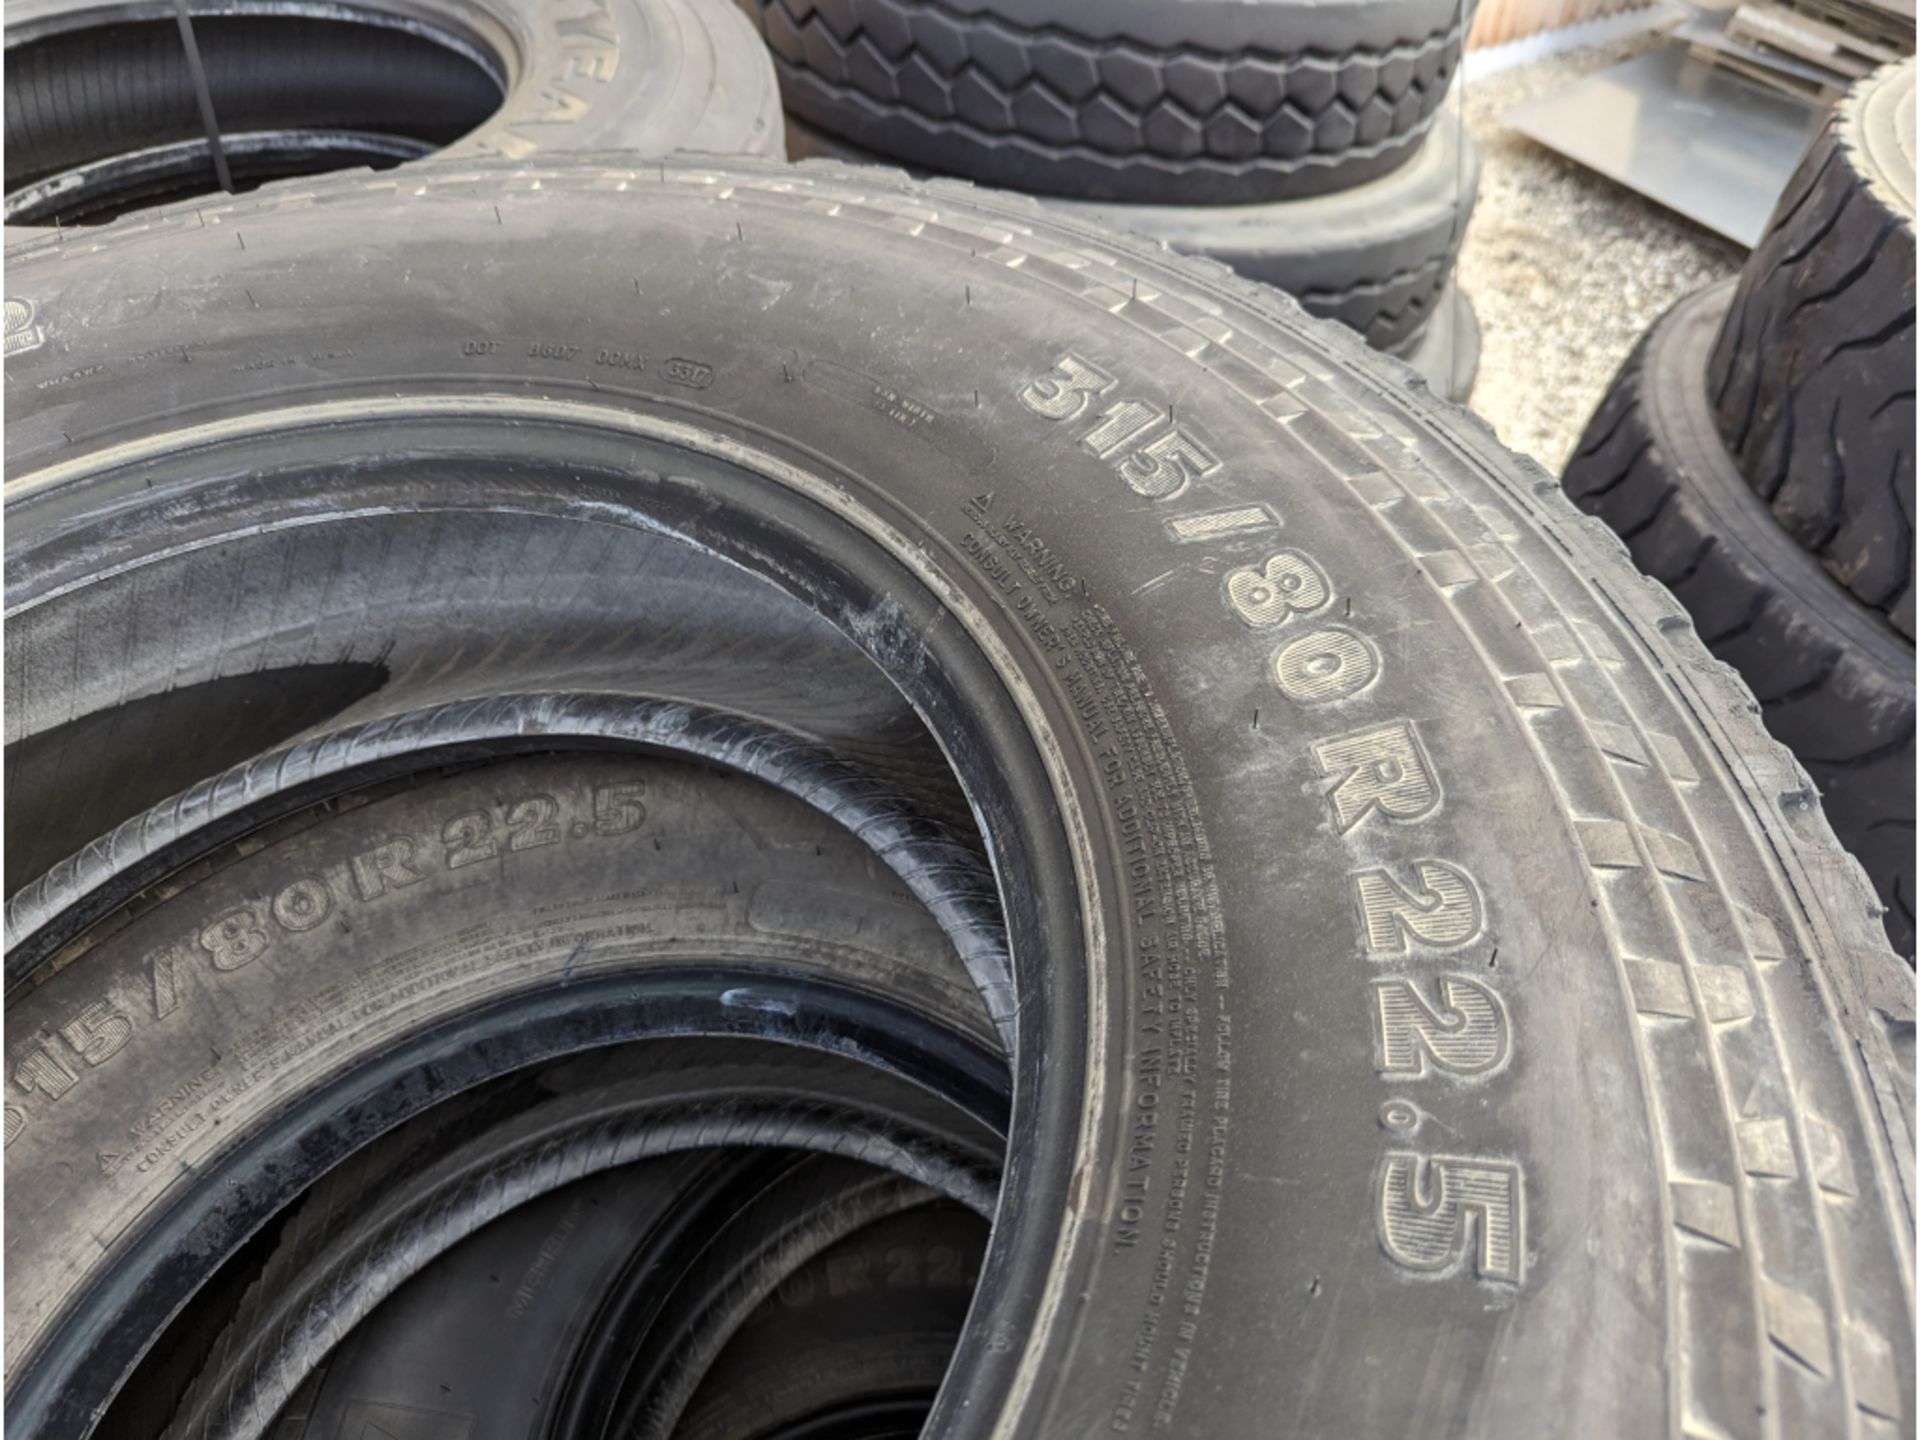 (4) Michelin XZUS 2 315/80R22.5 commercial truck tires USED Virgin Tread Surplus Take Off - Image 6 of 6